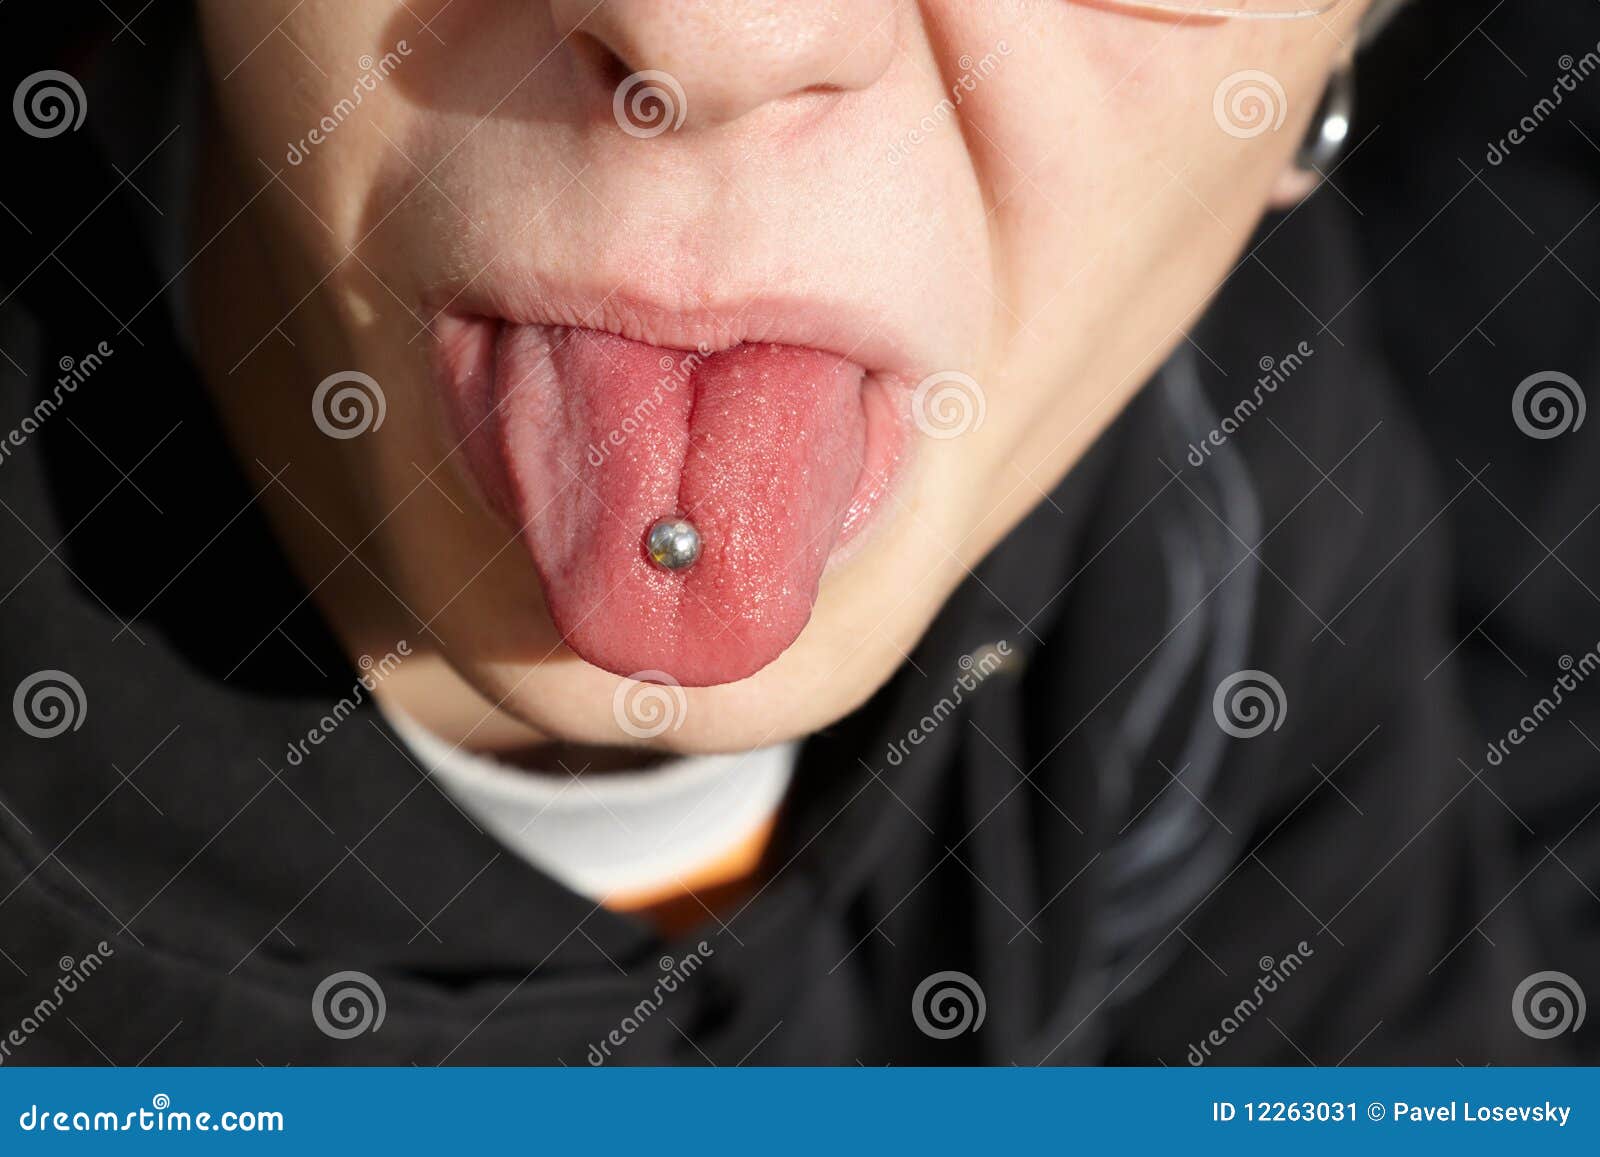 Teen Shows Tongue With Piercing Stock Image Image